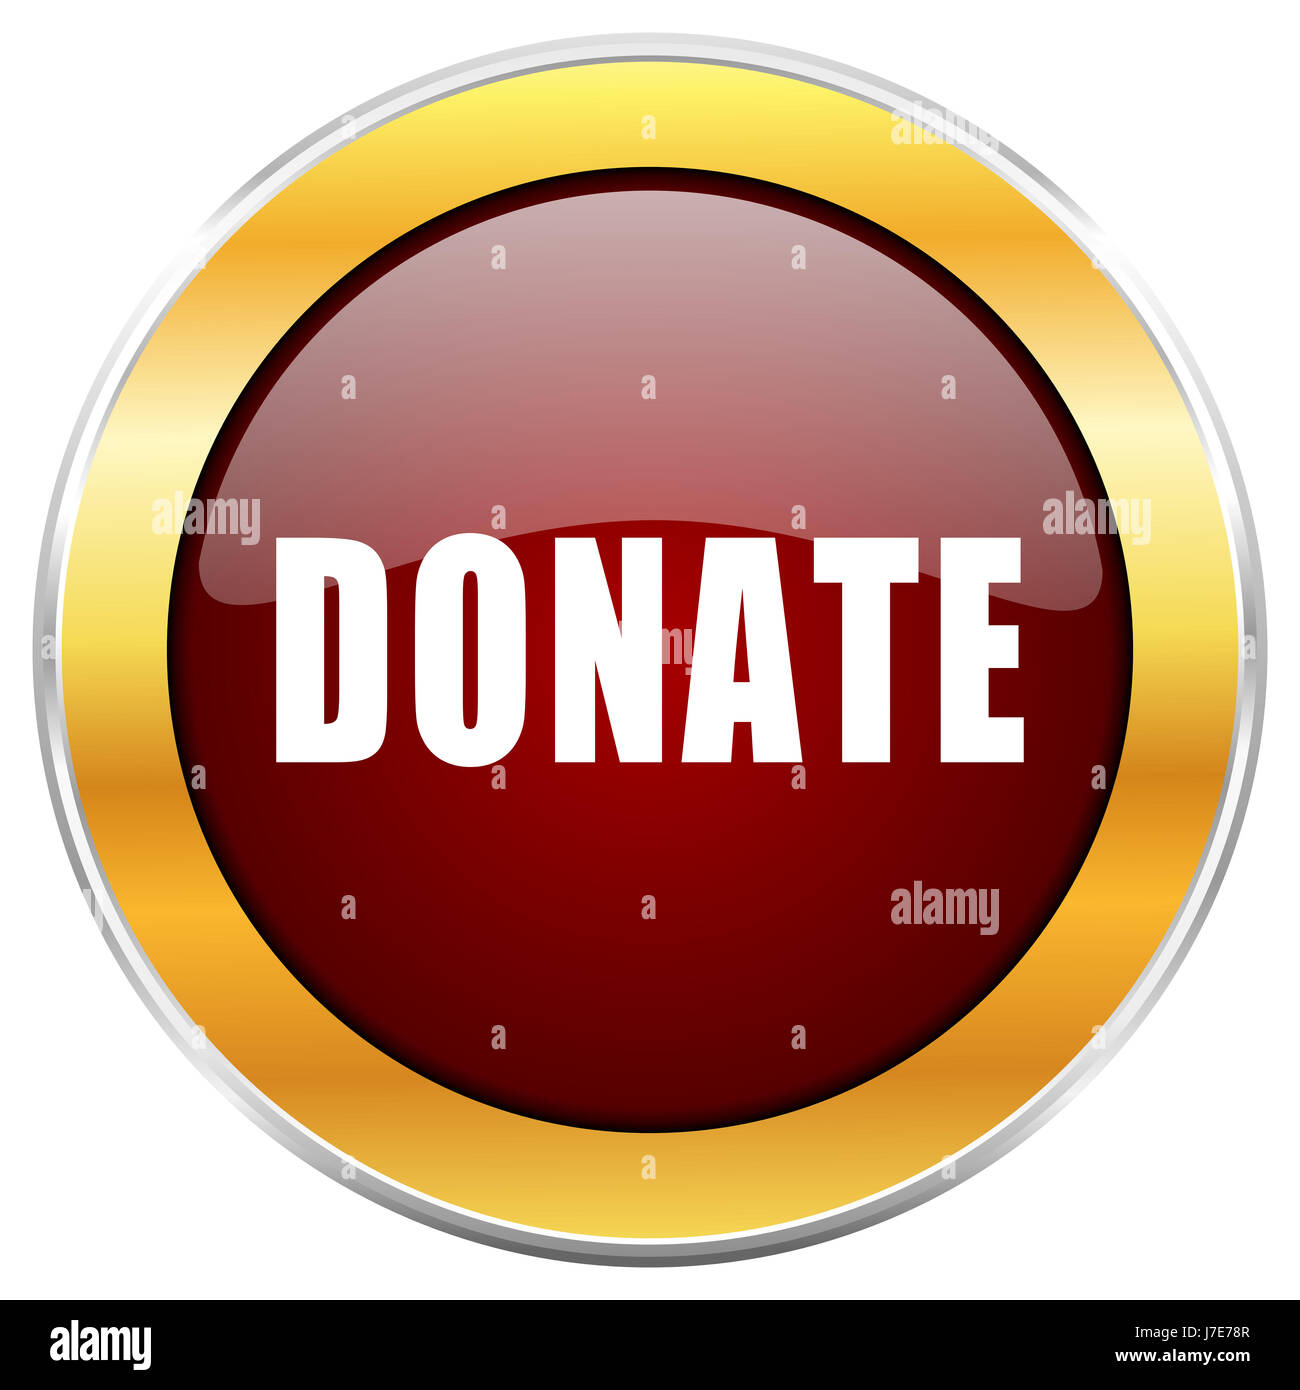 Donate red web icon with golden border isolated on white background. Round glossy button. Stock Photo